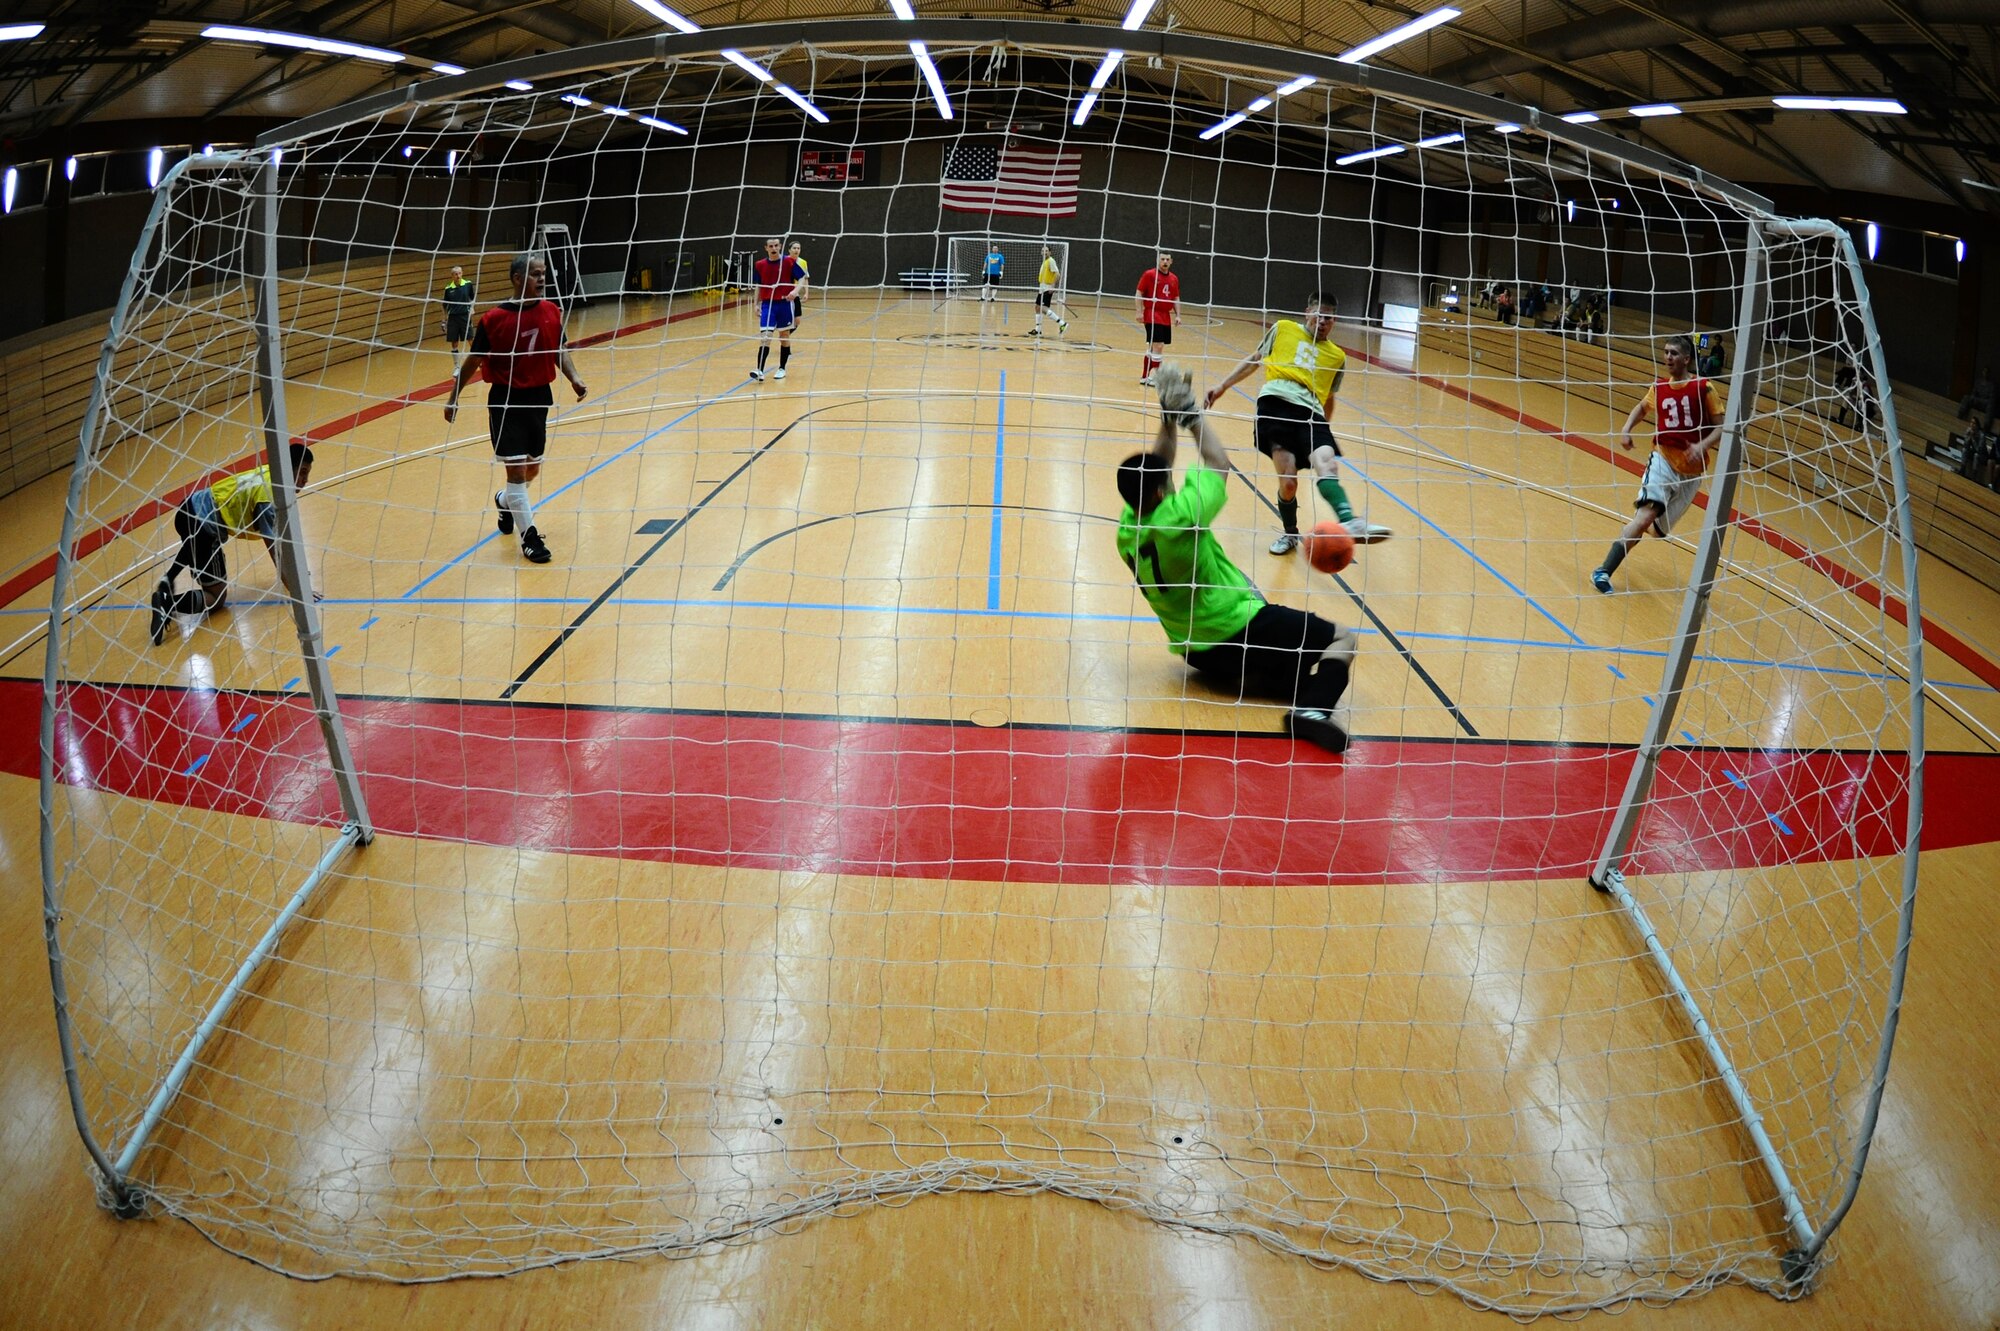 SPANGDAHLEM AIR BASE, Germany – Daniel Gonzales, 52nd Force Support Squadron, attempts to block a shot by Mike Krestyn, 81st Fighter Squadron, during the indoor soccer championship at the Skelton Memorial Fitness Center here June 12. The 52nd FSS defeated the 81st FS in the first game 7-6. The 81st FS won the double-elimination championship after winning the second game 9-5. (U.S. Air Force photo by Airman 1st Class Matthew B. Fredericks/Released)